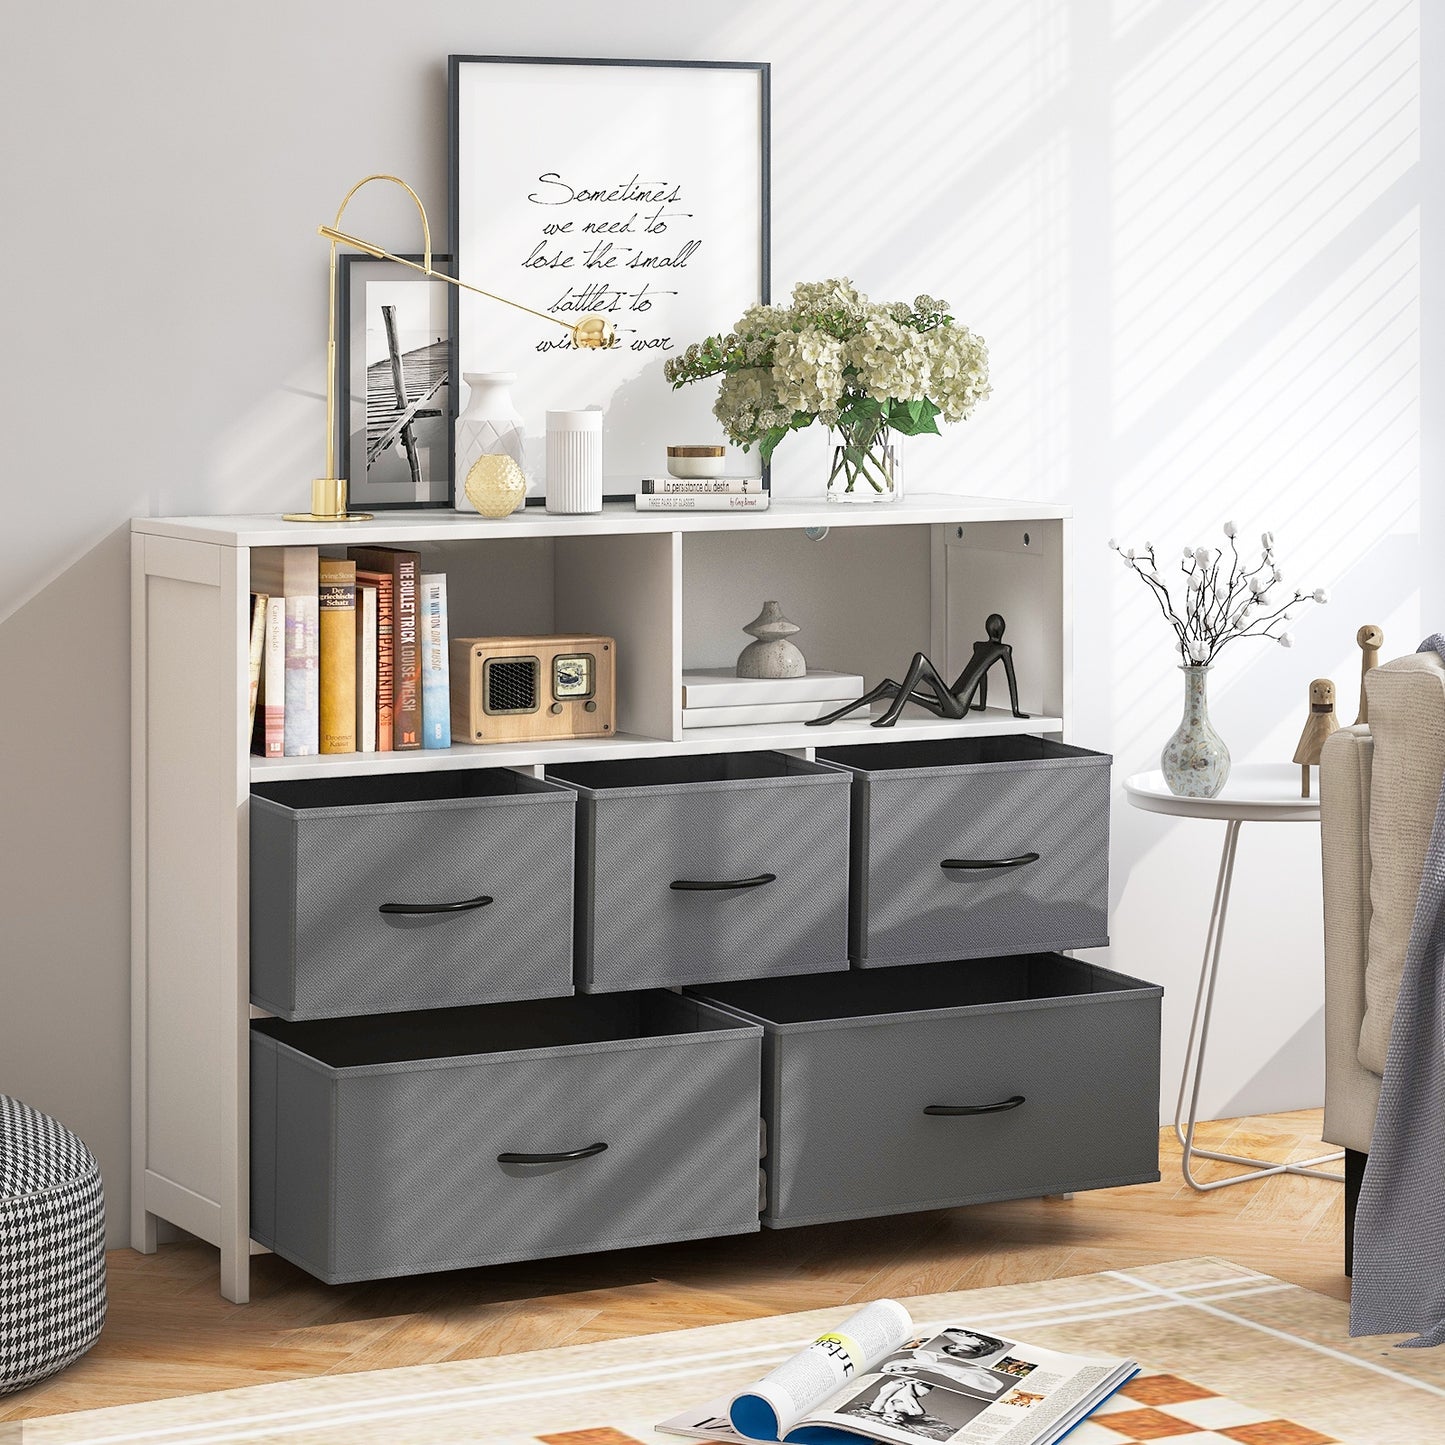 Fabric Dresser with 5 Drawers for Bedroom-White